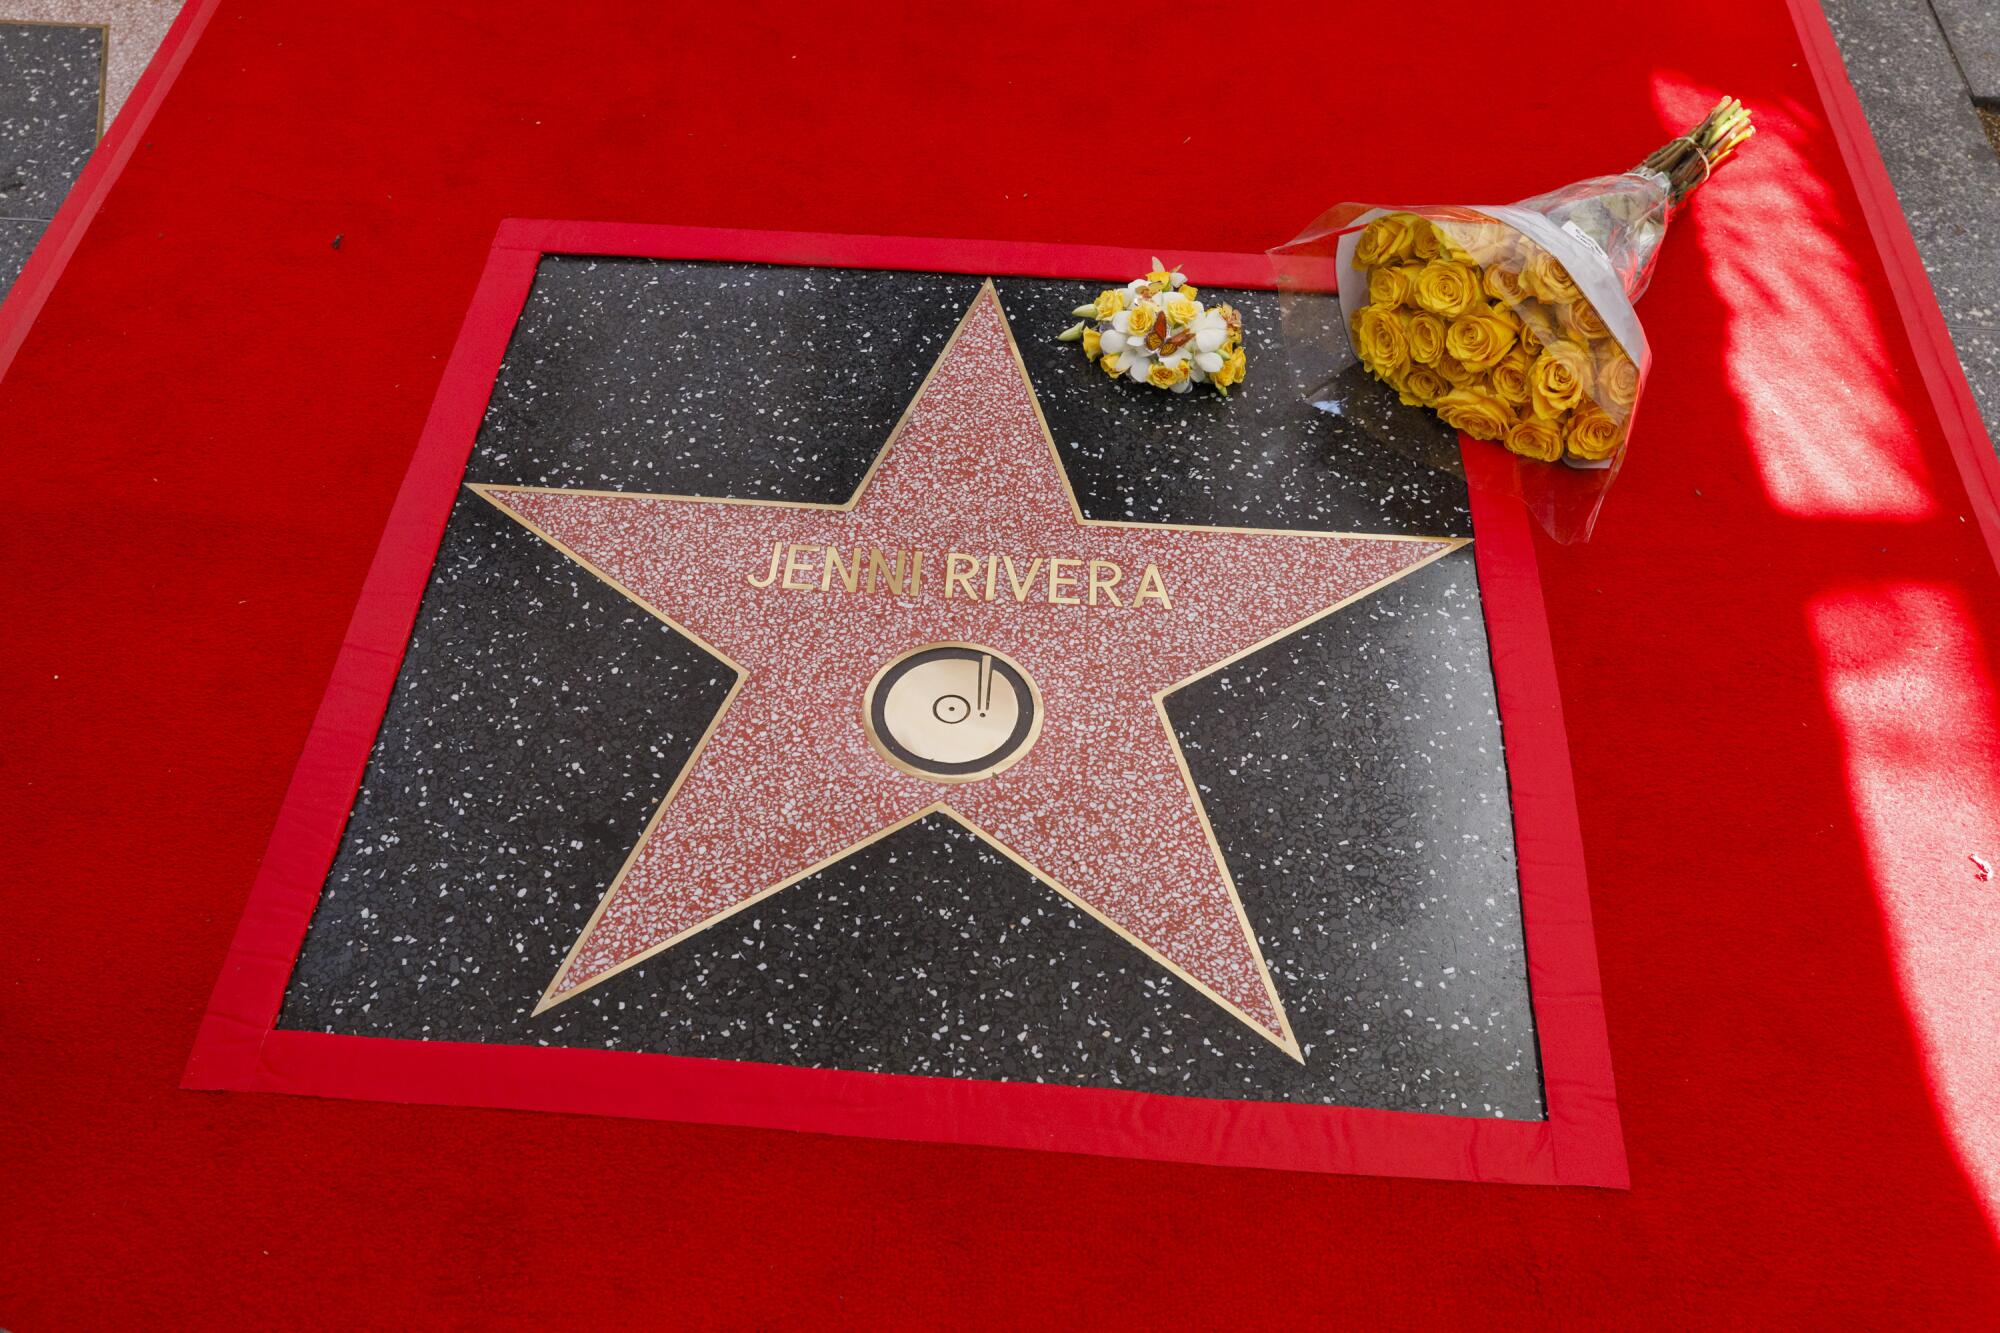 Flowers in the corner of Jenni Rivera's posthumous star on the Hollywood Walk of Fame